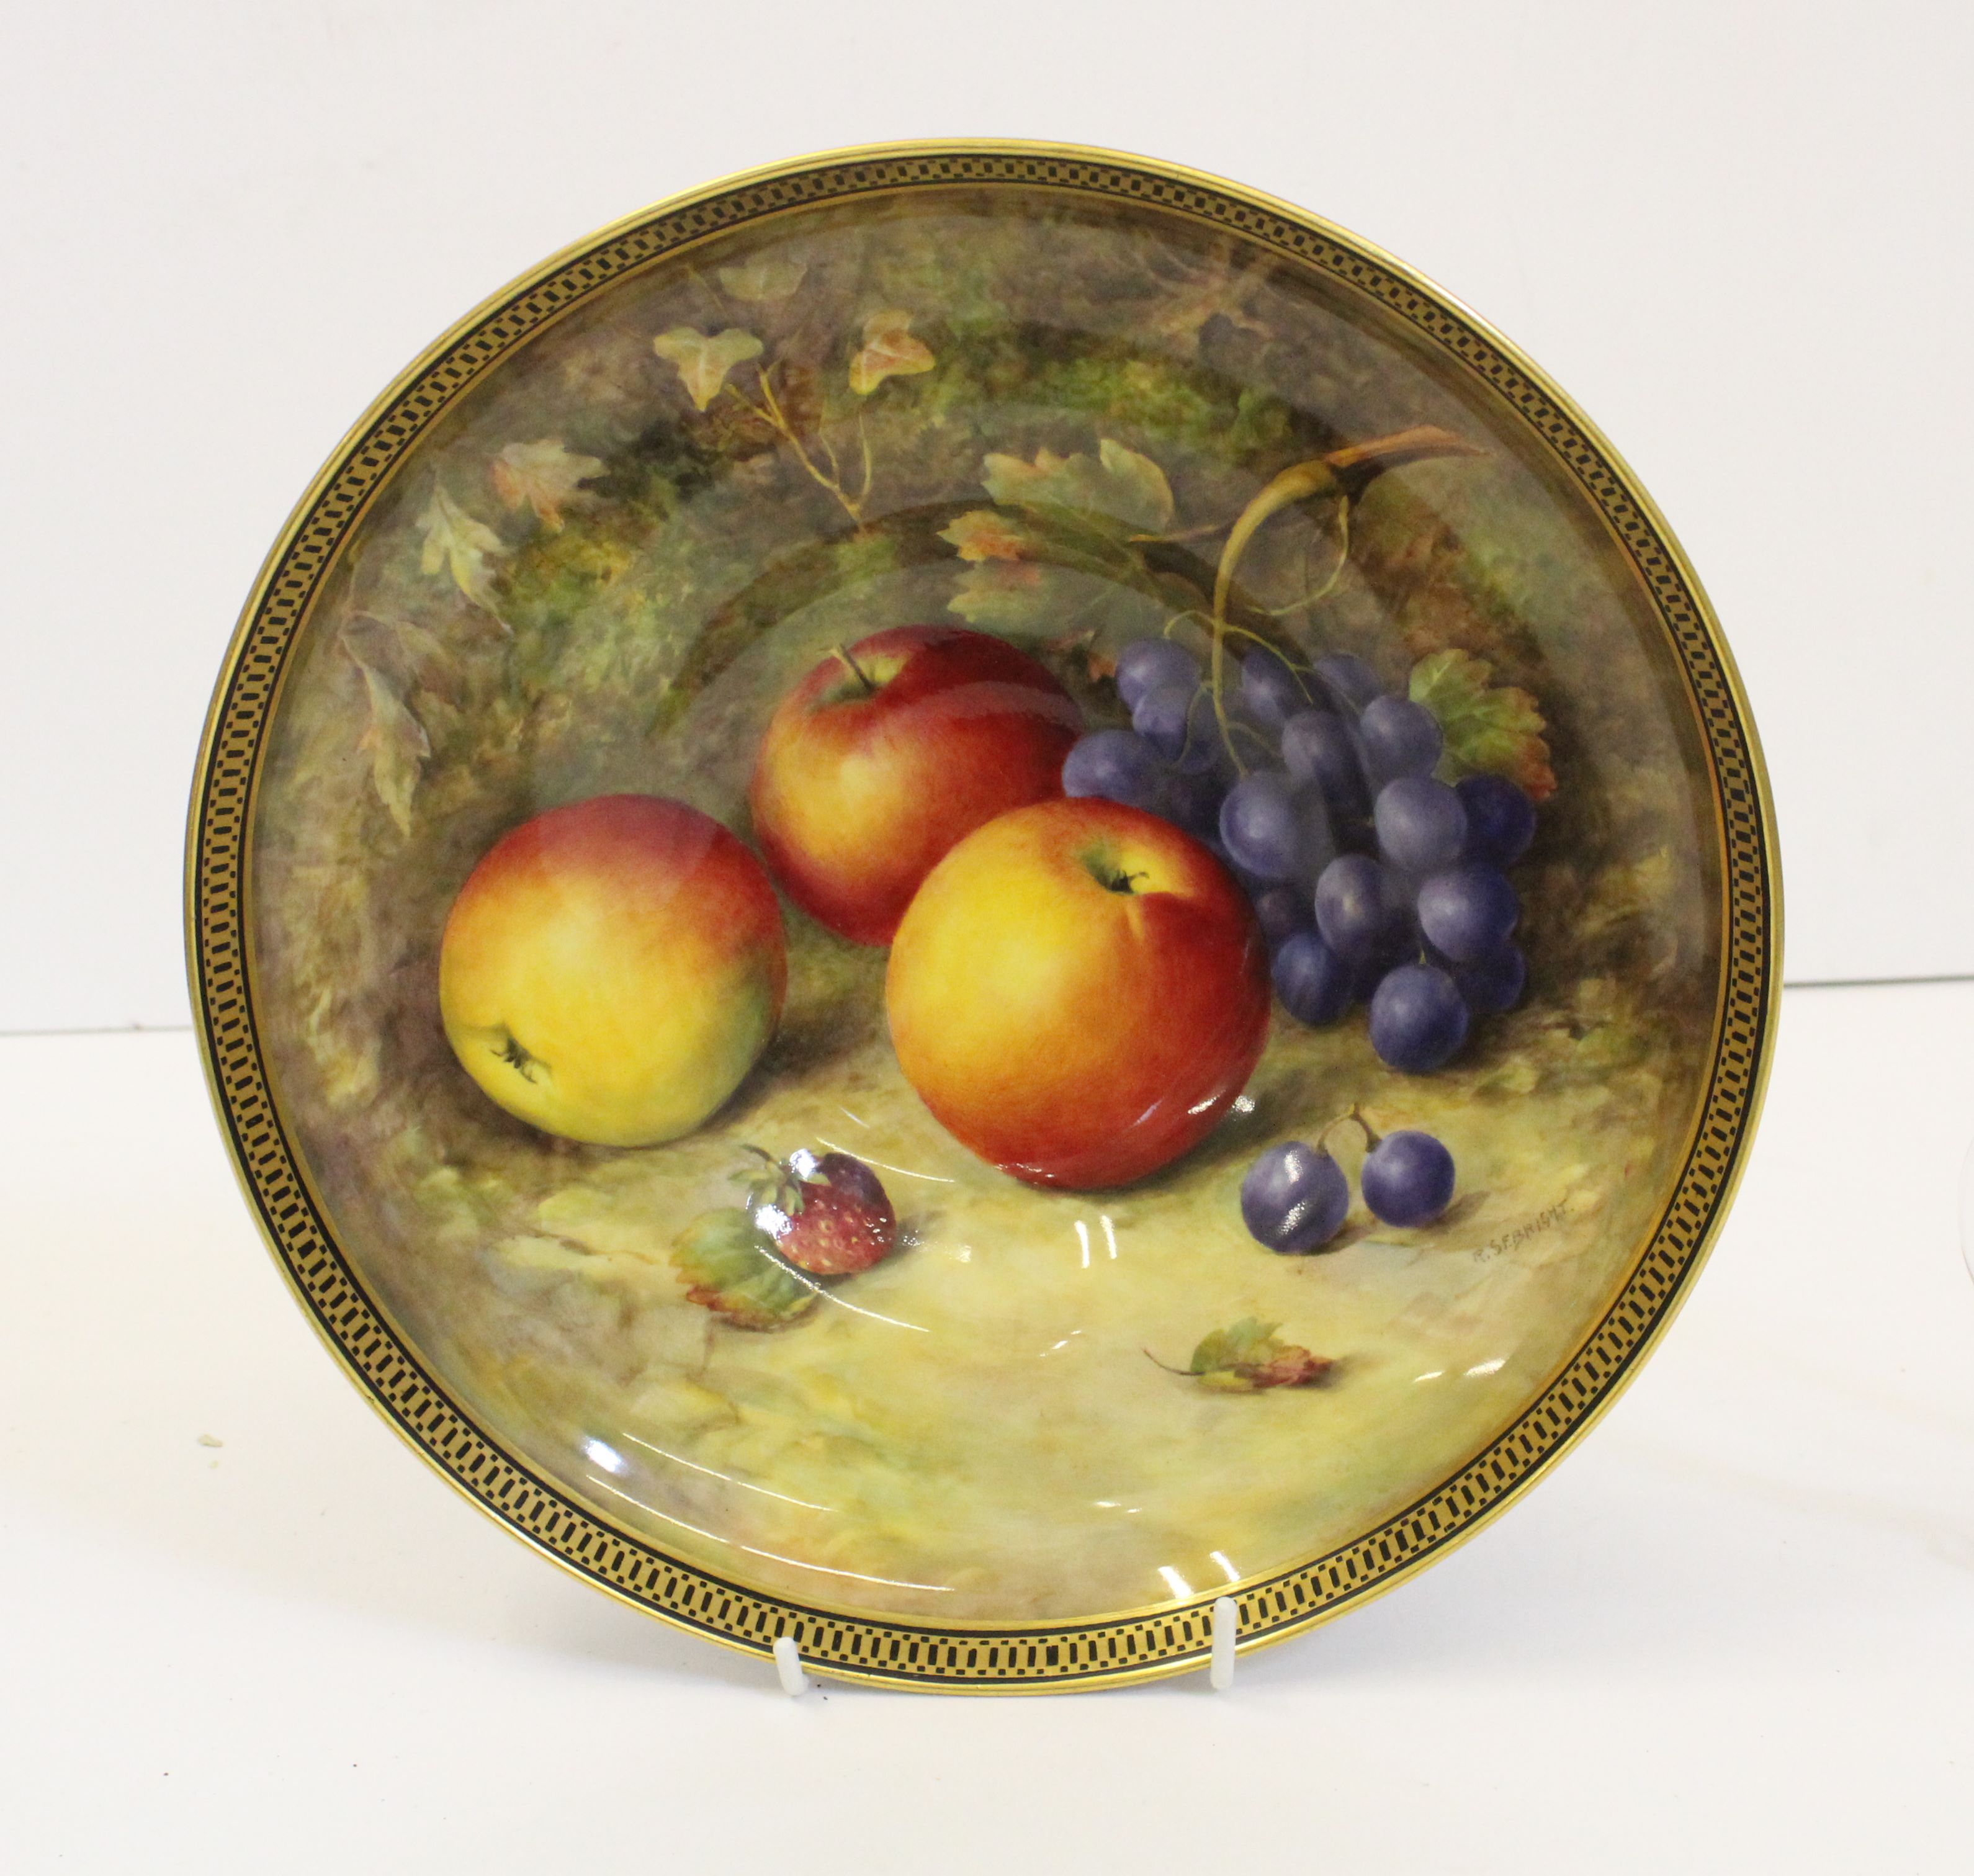 A Royal Worcester porcelain pedestal bowl, signed R.Sebright, painted with apples and grapes against - Image 2 of 3